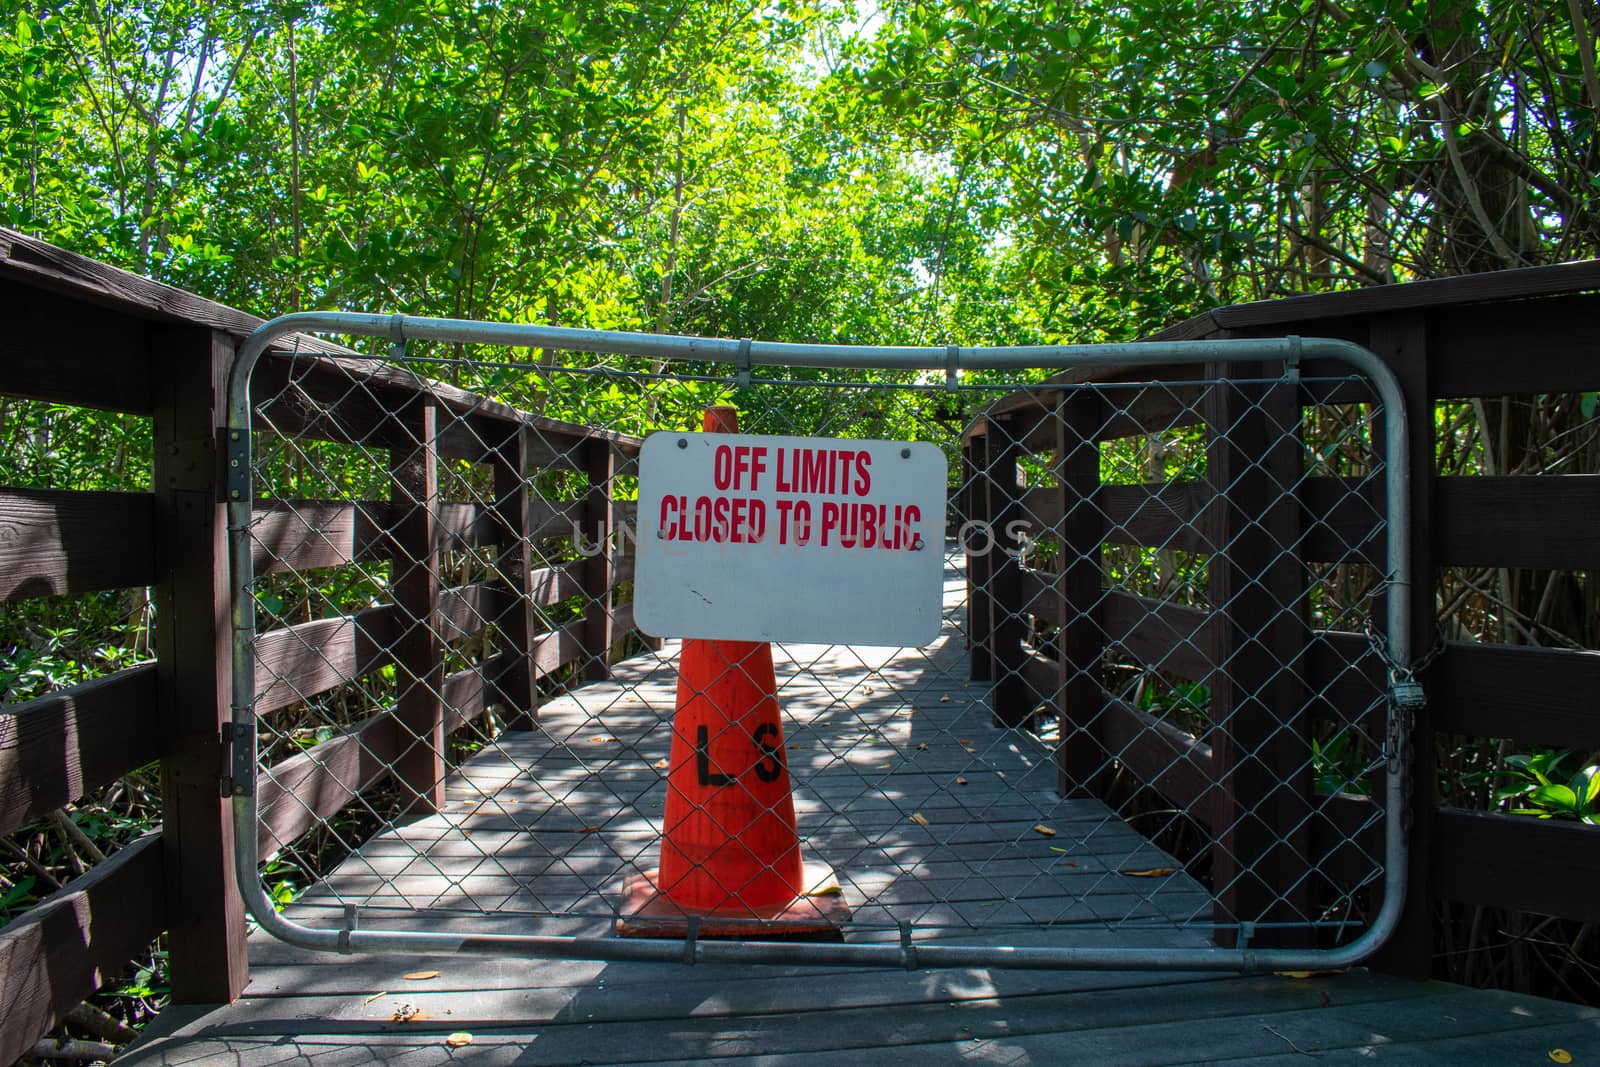 A Boardwalk With a Fenced Off Section With a Traffic Cone Behind It Stating That It's Off Limits to the Public